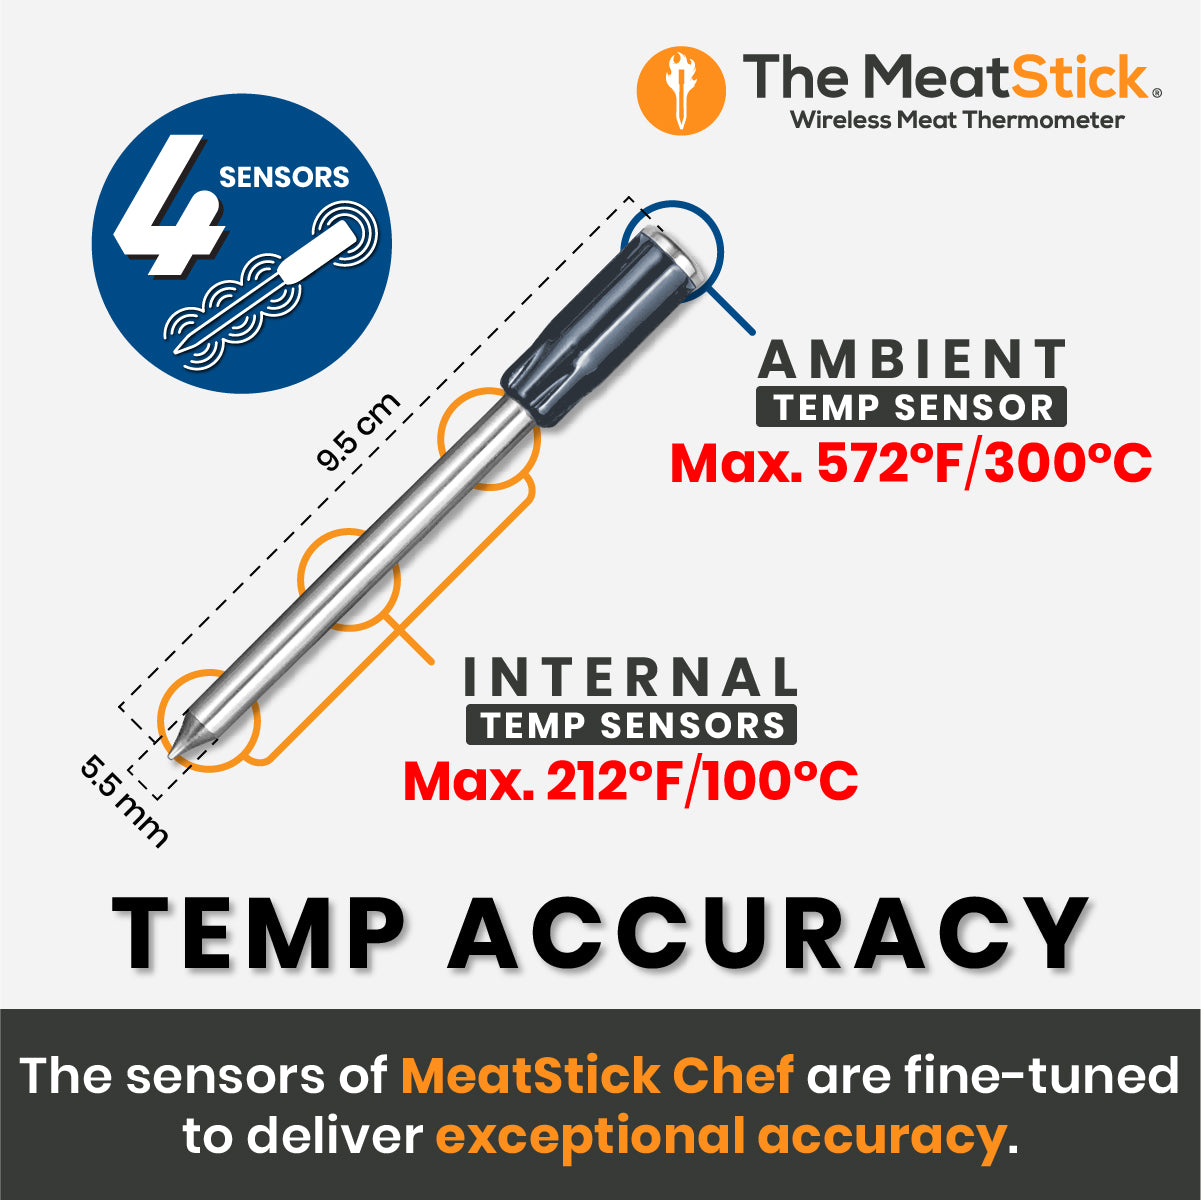 Meatstick 4X Quad Sensor Wireless Meat Thermometer Review and Use [Has  Meater been dethroned?] 